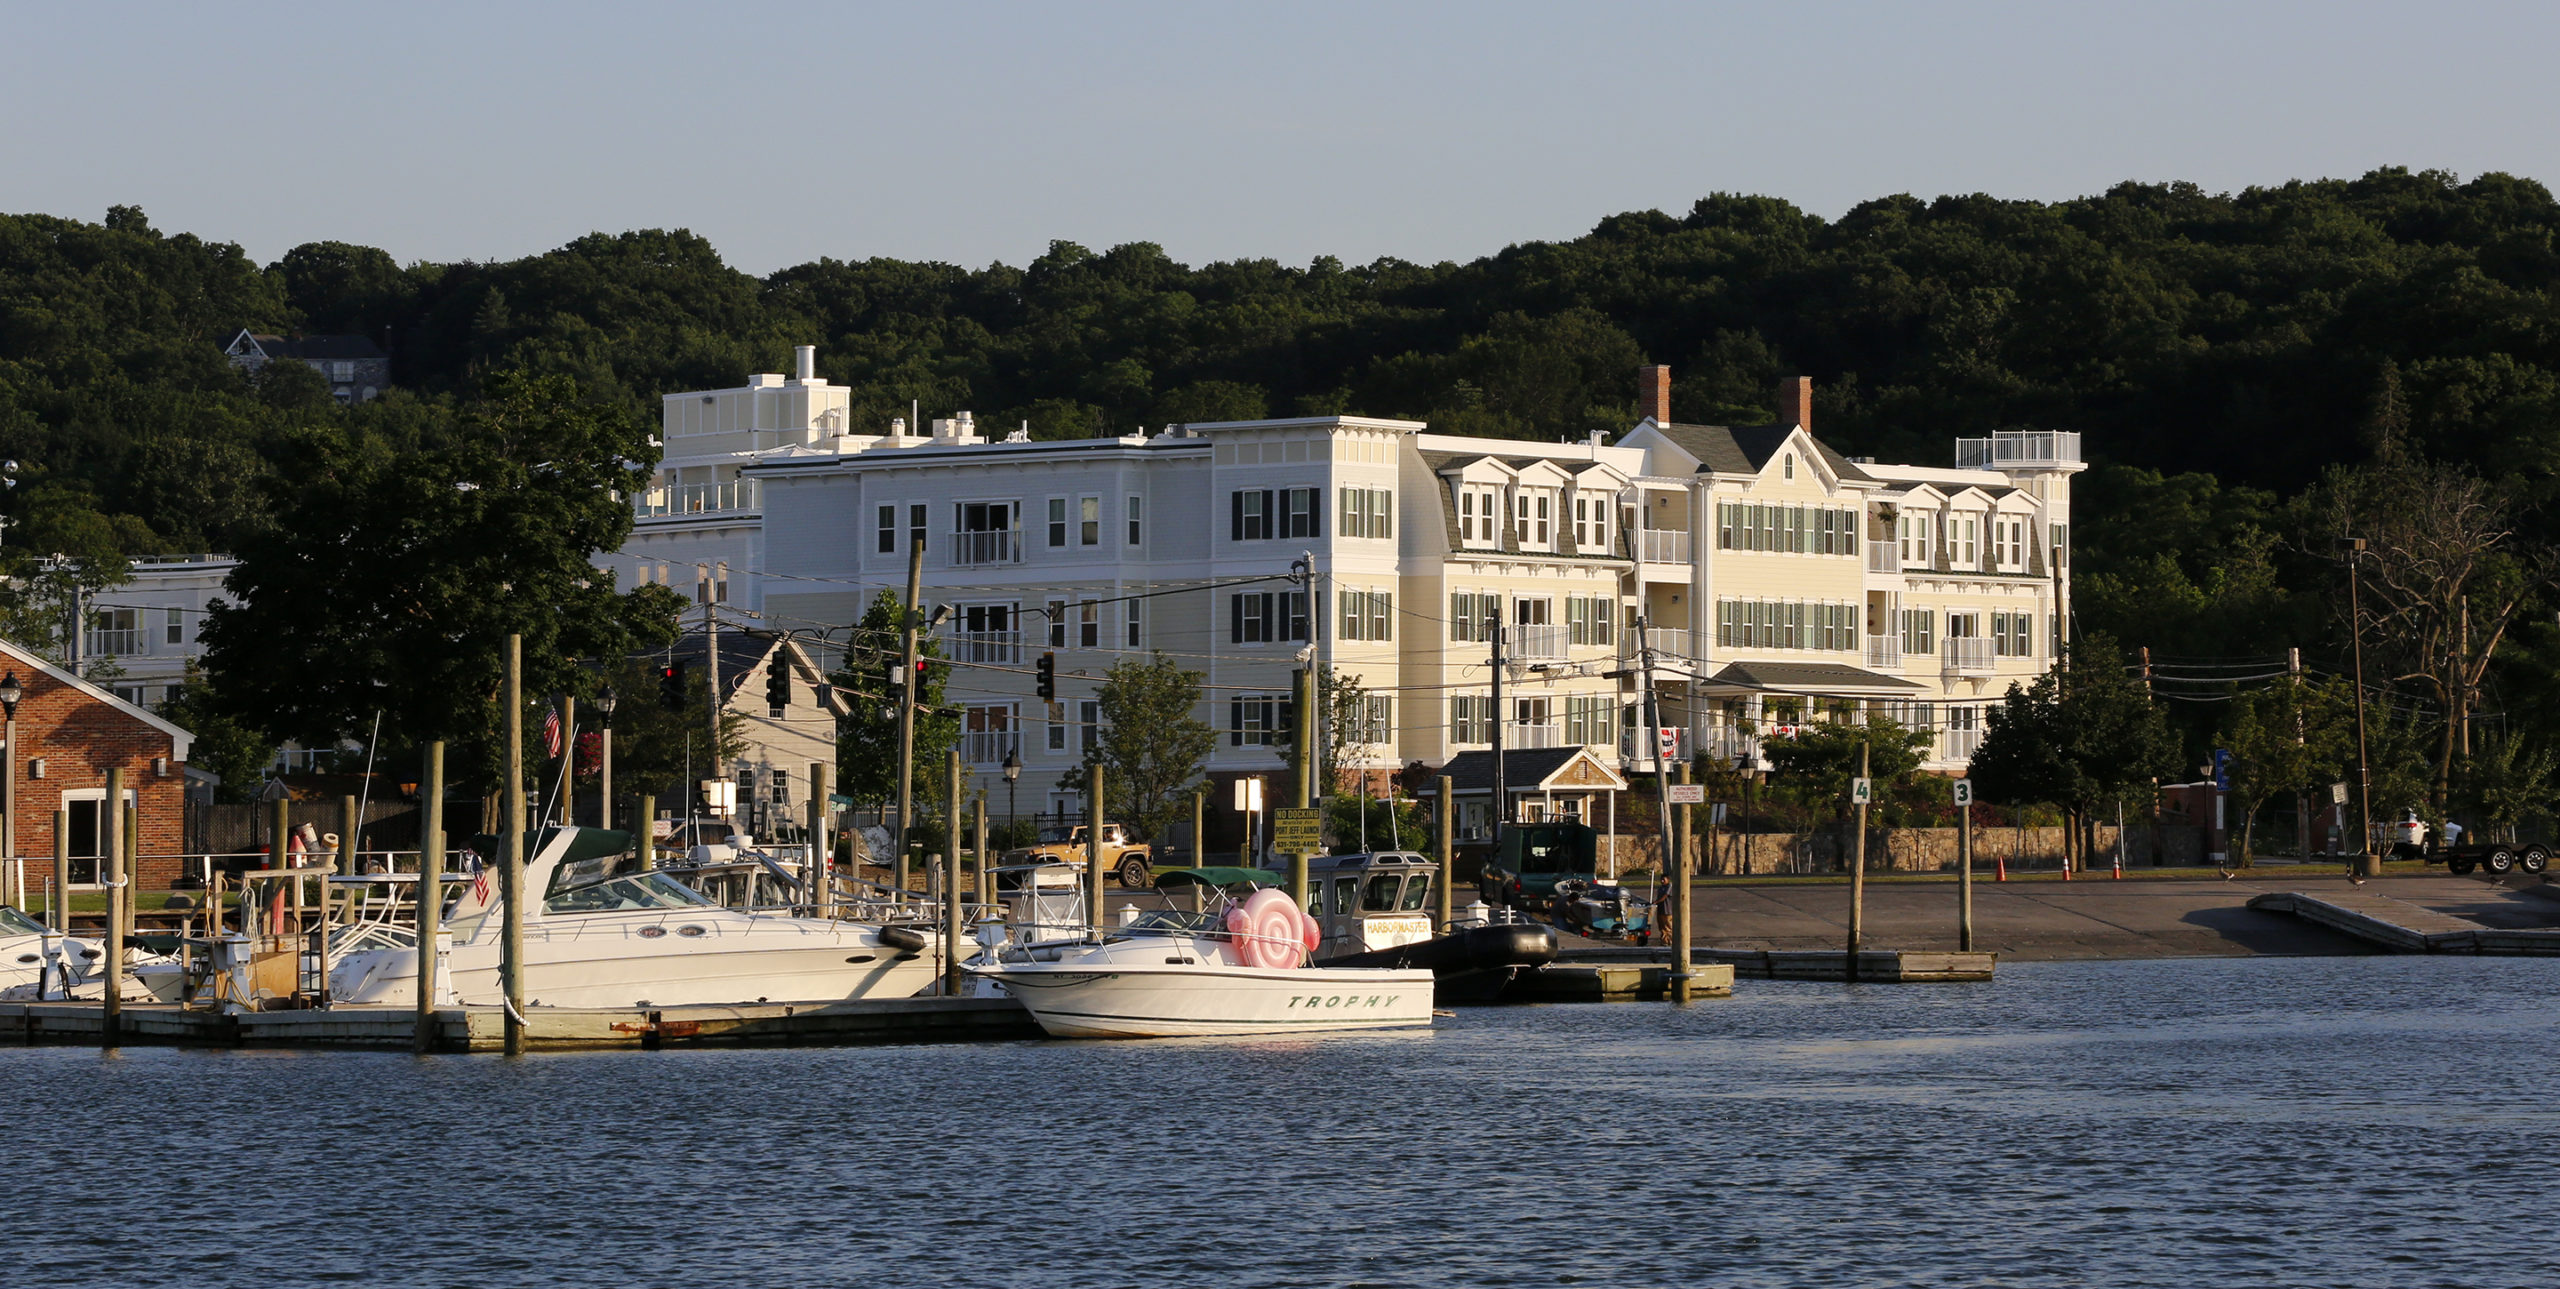 View of The Shipyard from Port Jeff Harbor